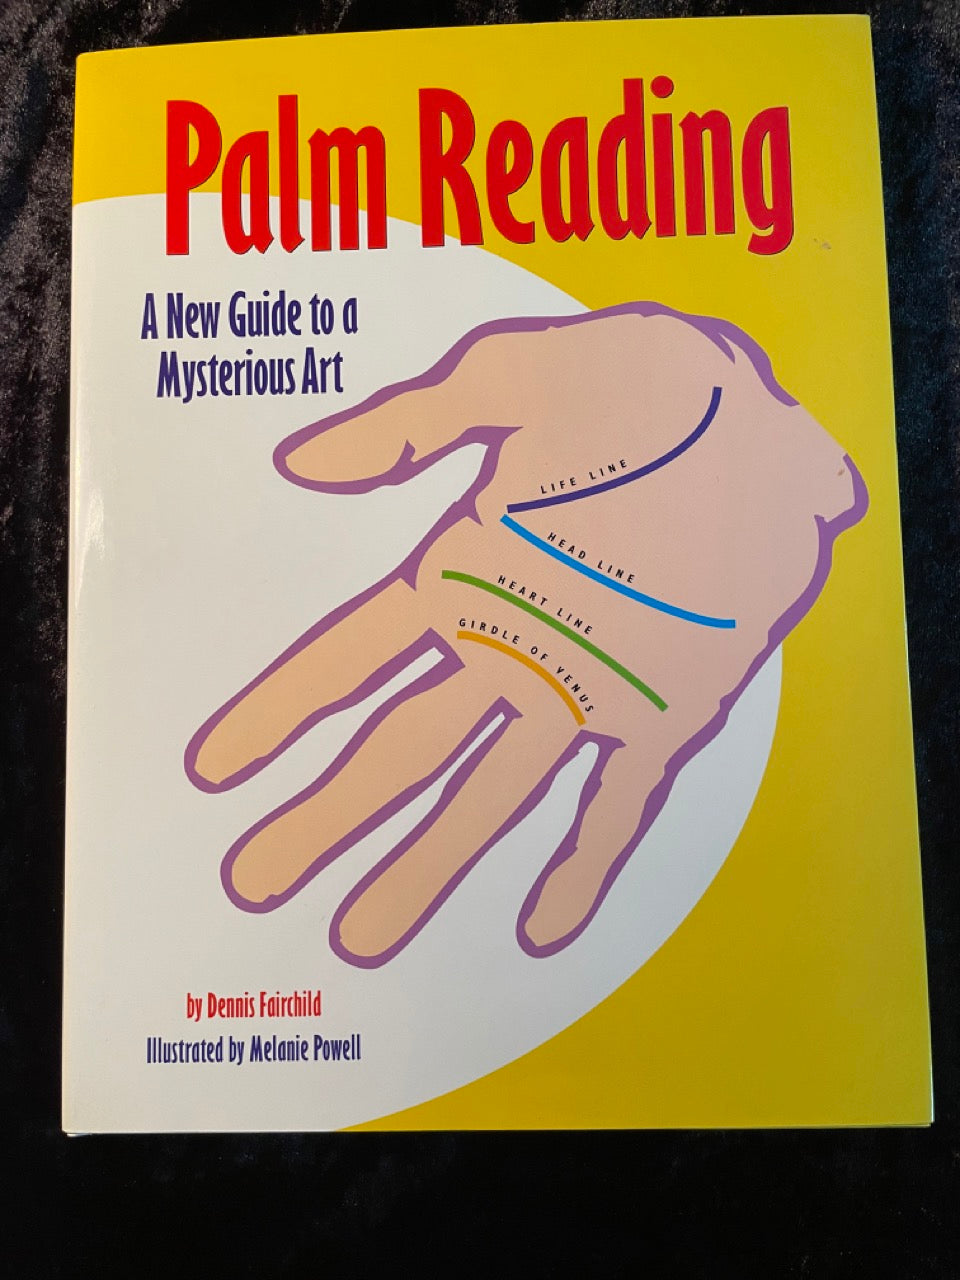 Palm Reading: A New Guide to a Mysterious Art - Dennis Fairchild